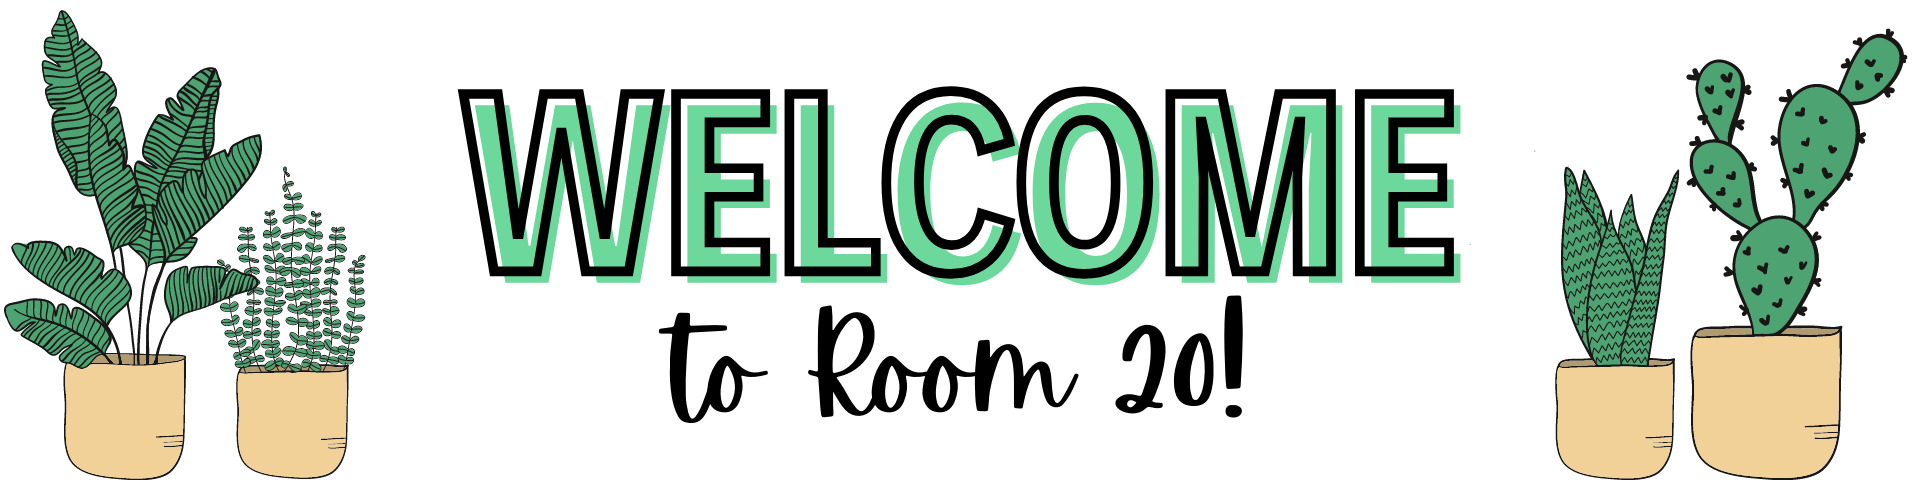 Welcome to Room 20